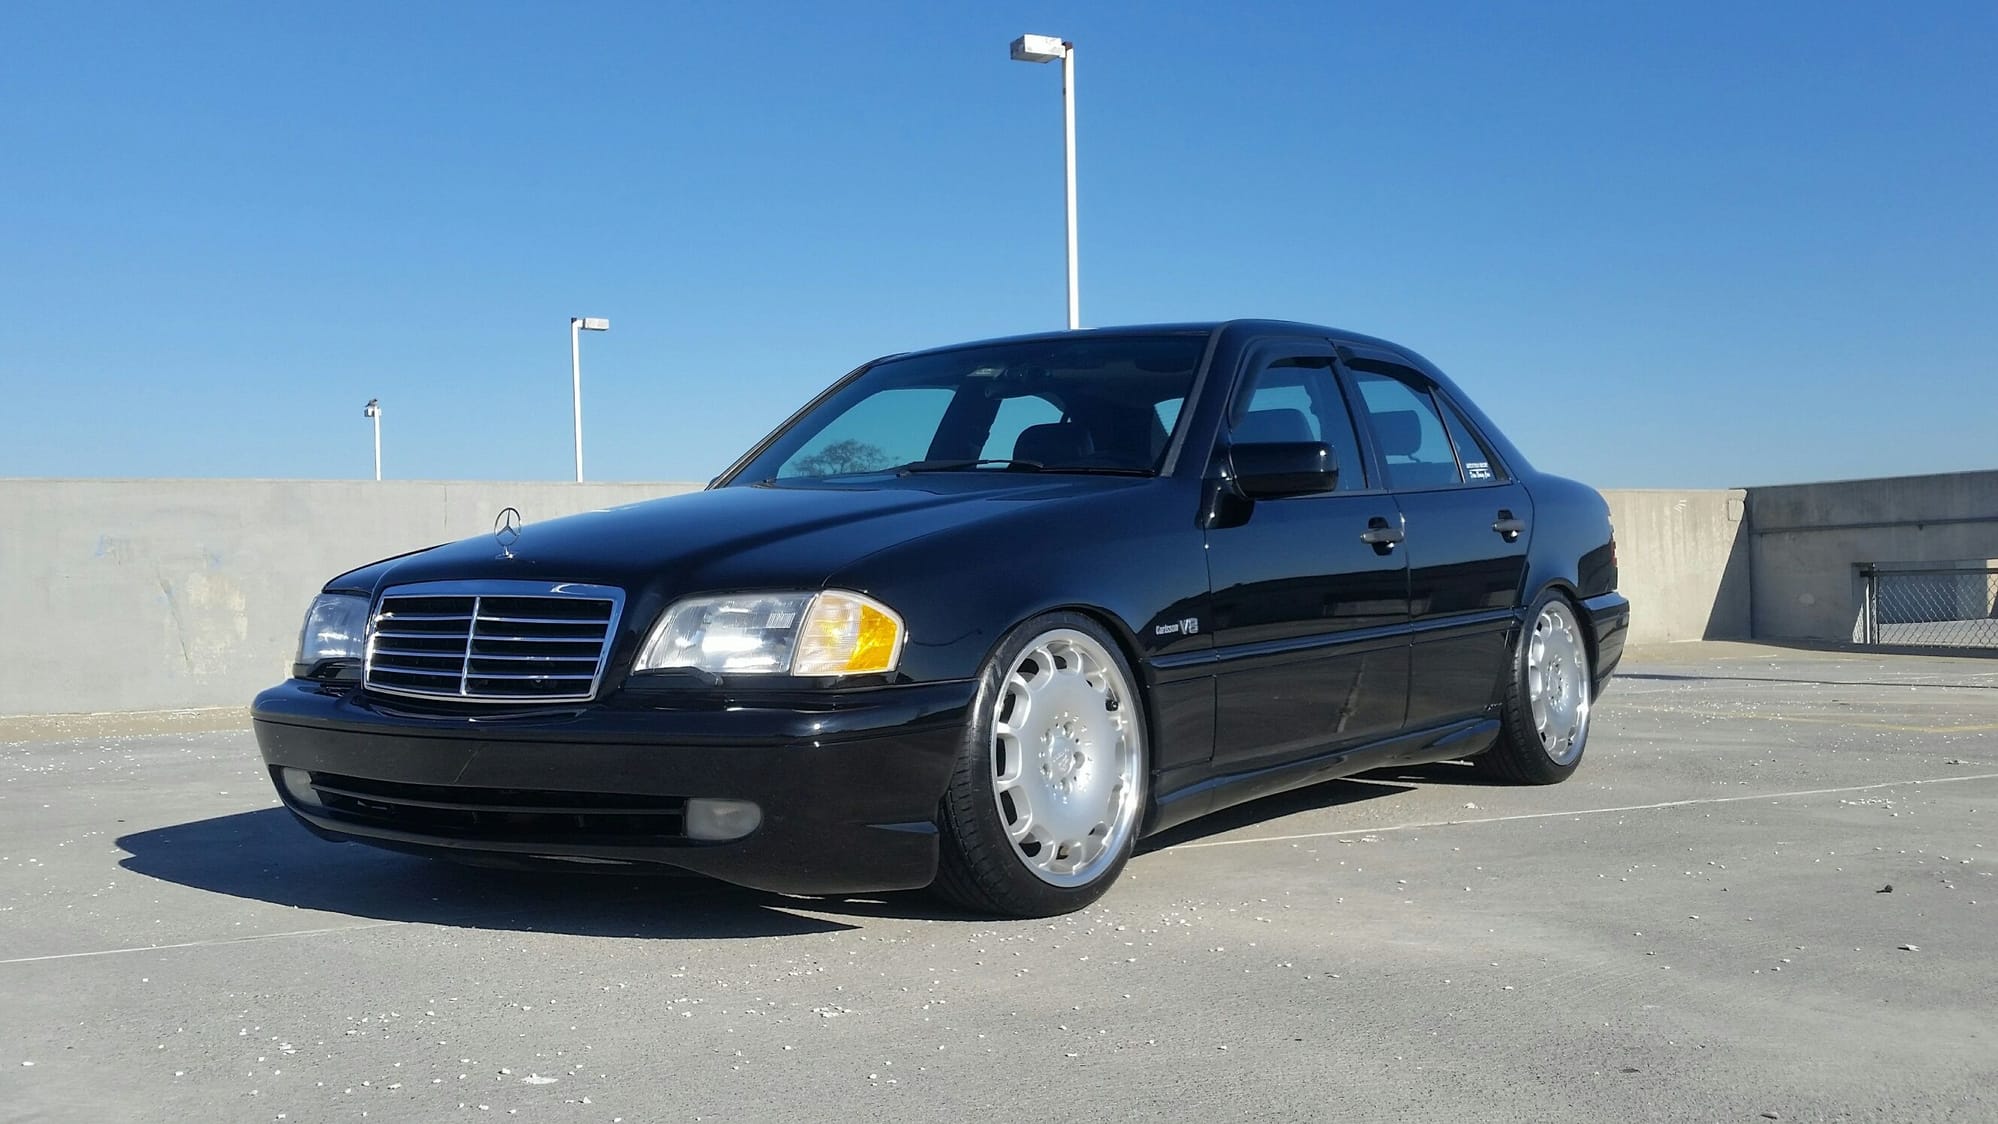 W202 AMG Picture Thread - Page 97 - MBWorld.org Forums